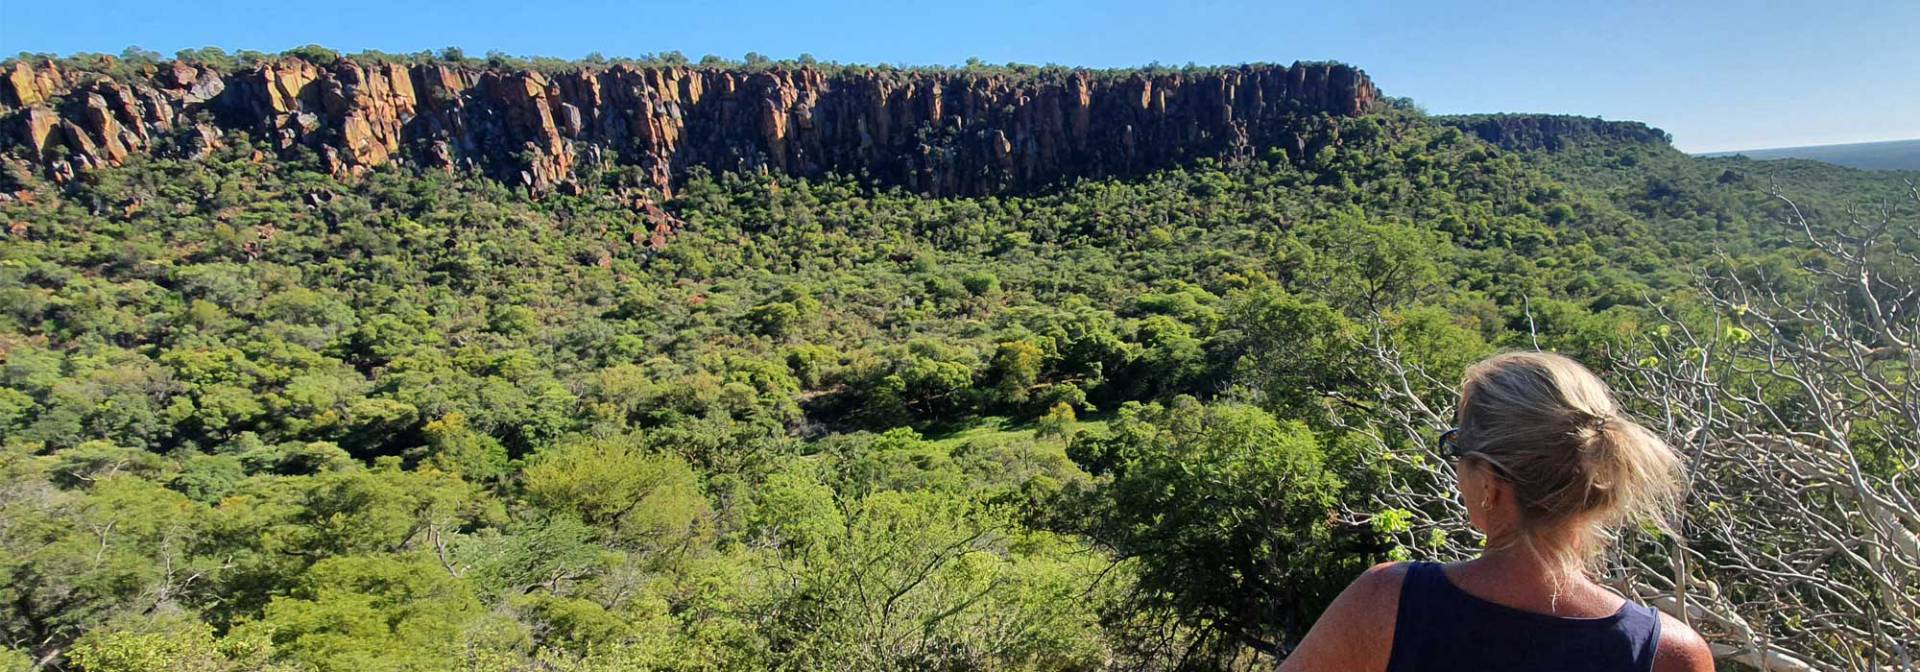 At the Waterberg in Namibia